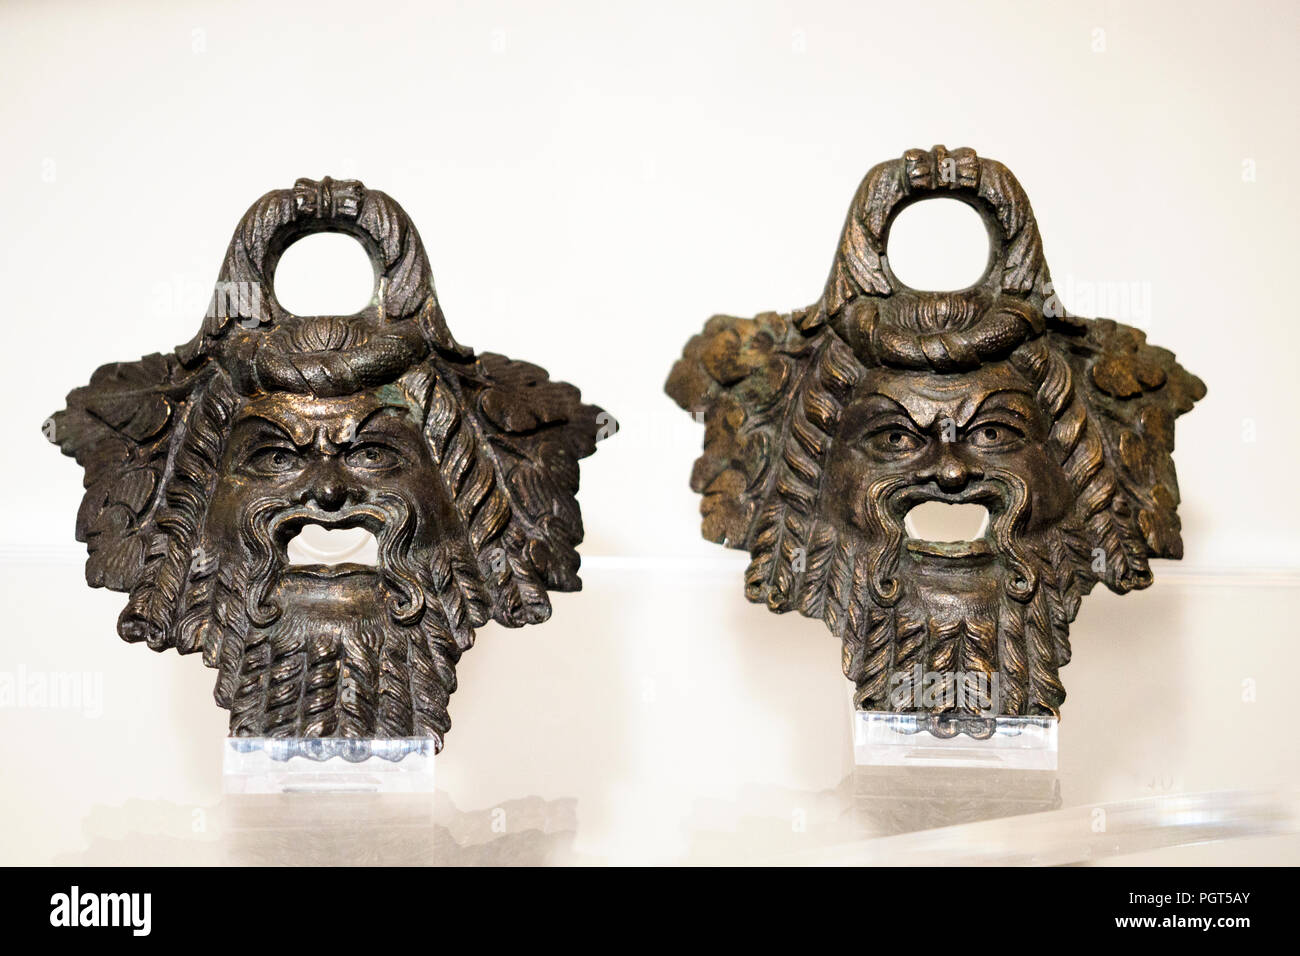 Two bronze handles in the form of a silen mask surrounded by vine leaves, imperial Roman age - National Roman Museum in Palazzo Massimo alle Terme - Rome, Italy Stock Photo